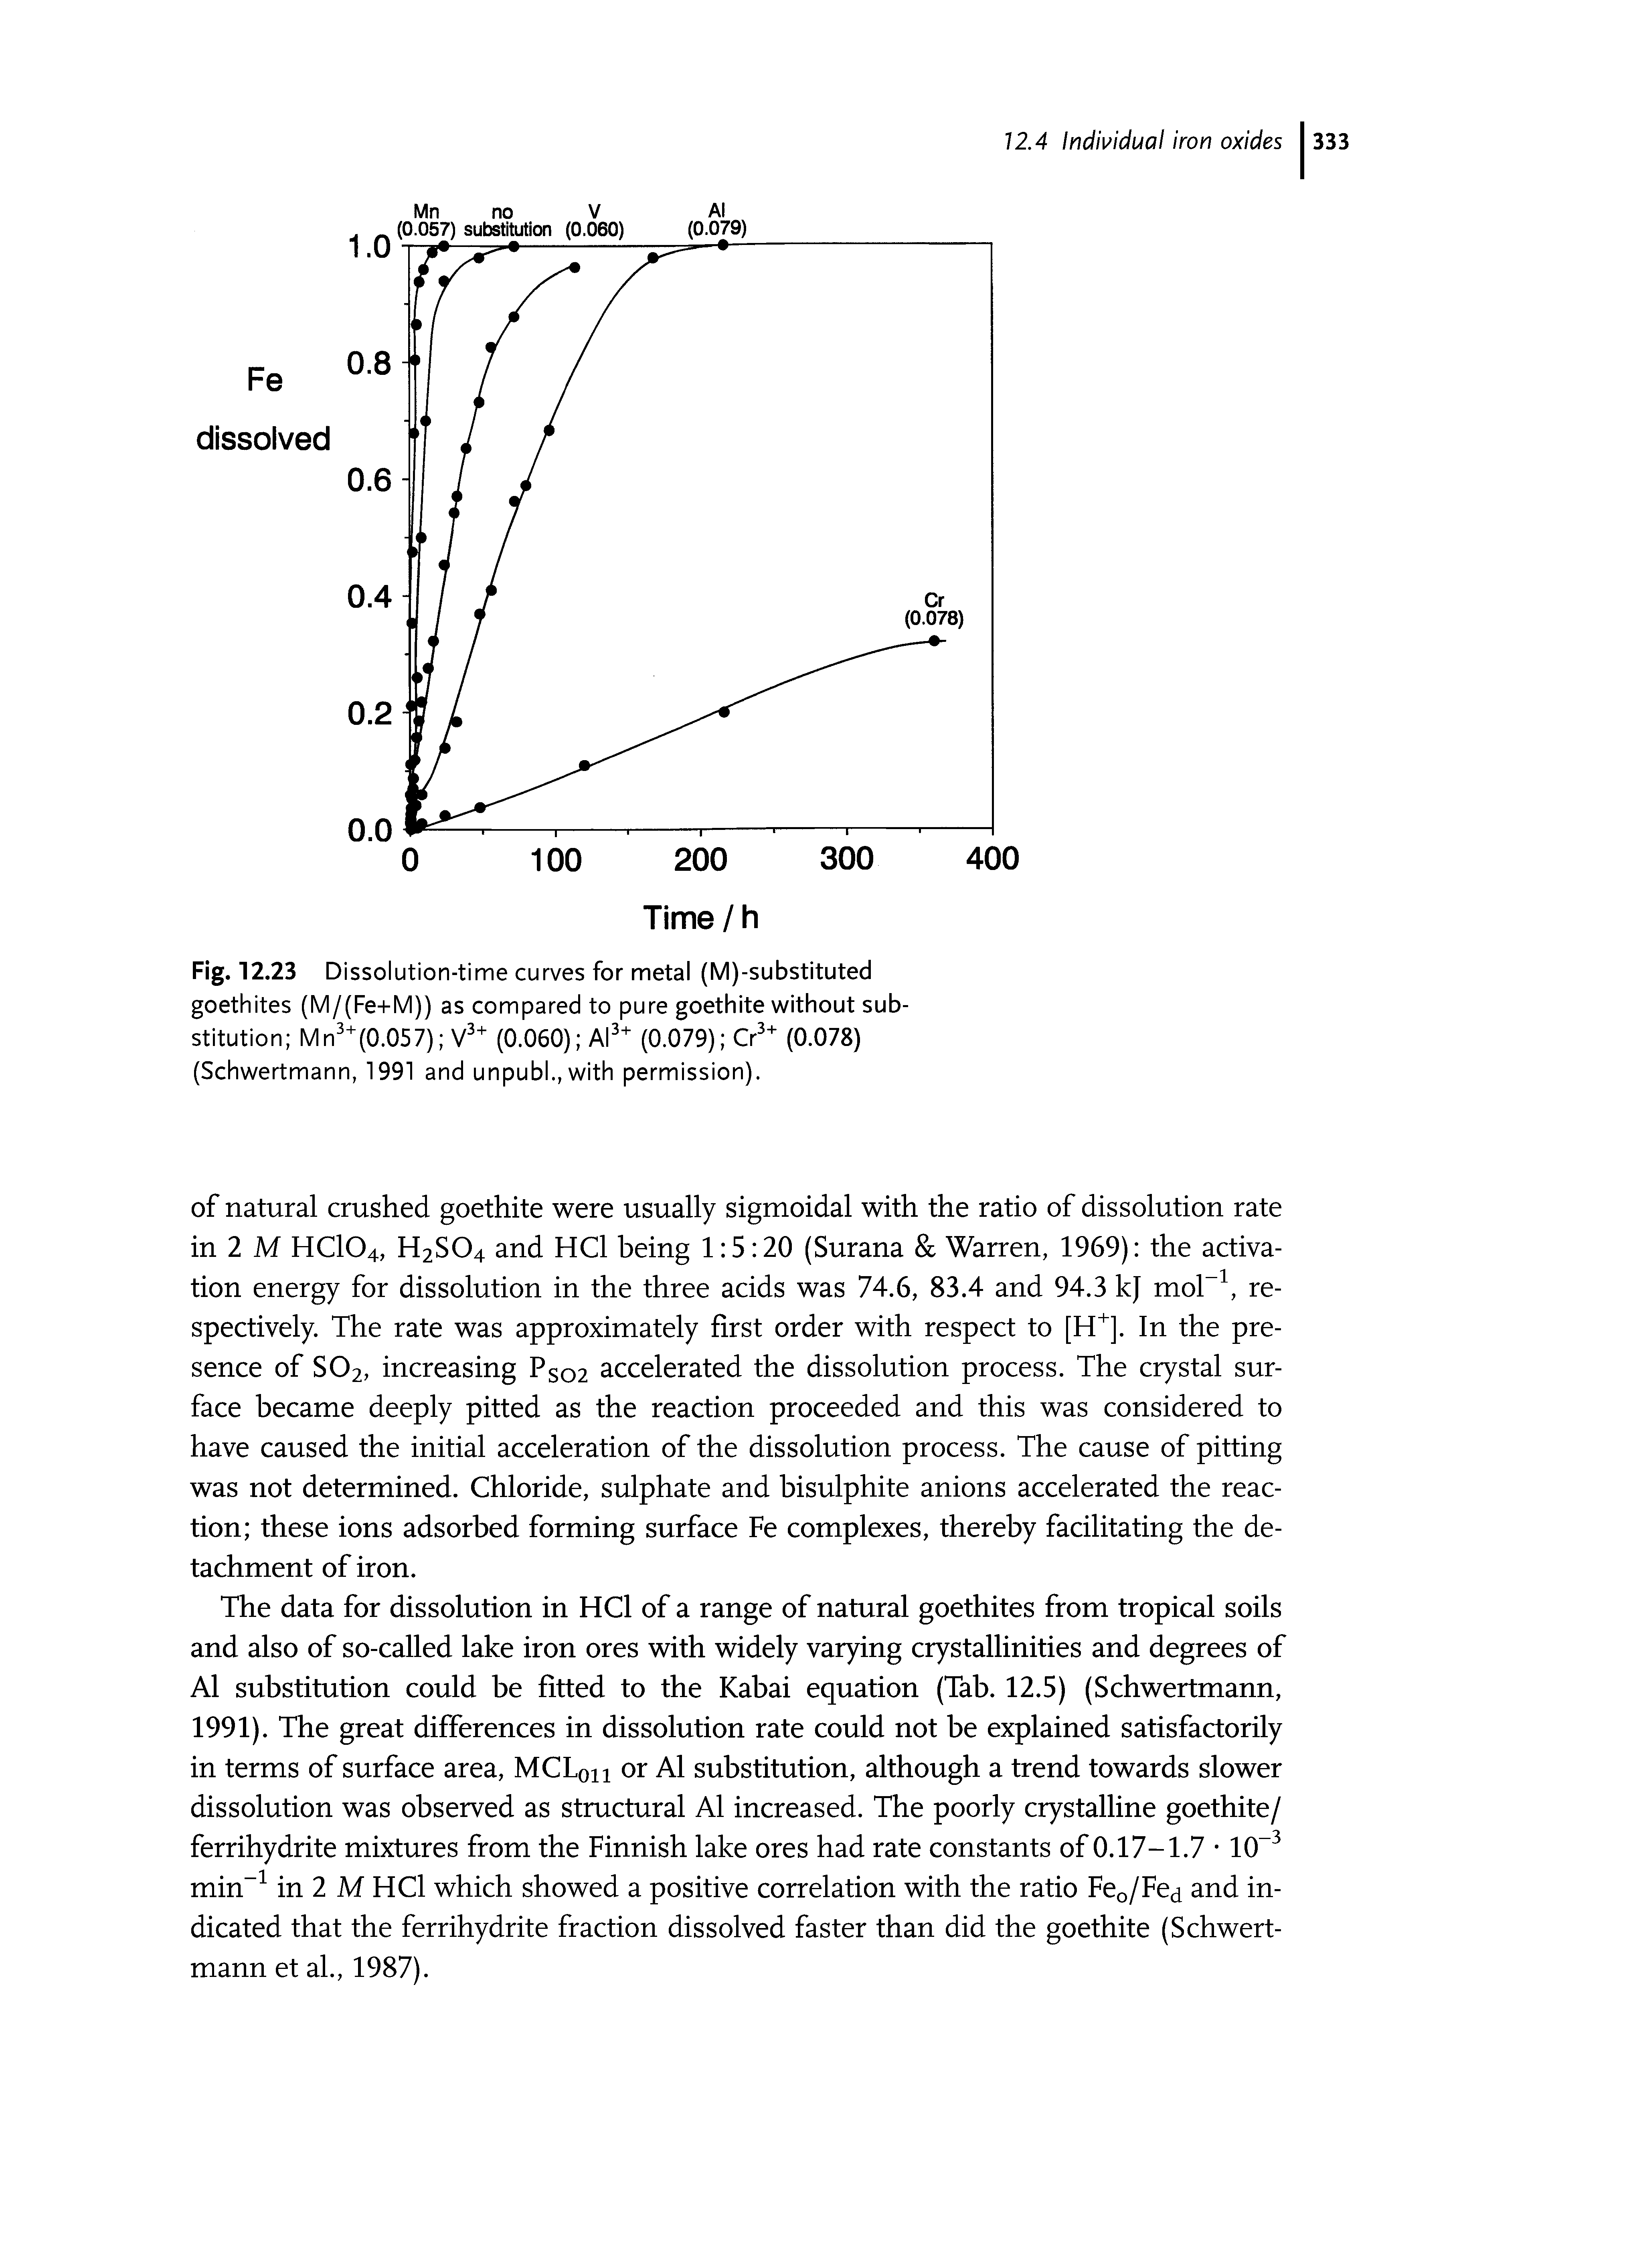 Fig. 12.23 Dissolution-time curves for metal (M)-substituted goethites (M/(Fe-i-M)) as compared to pure goethite without substitution Mn (0.057) (0.060) (0.079) Cr -" (0.078)...